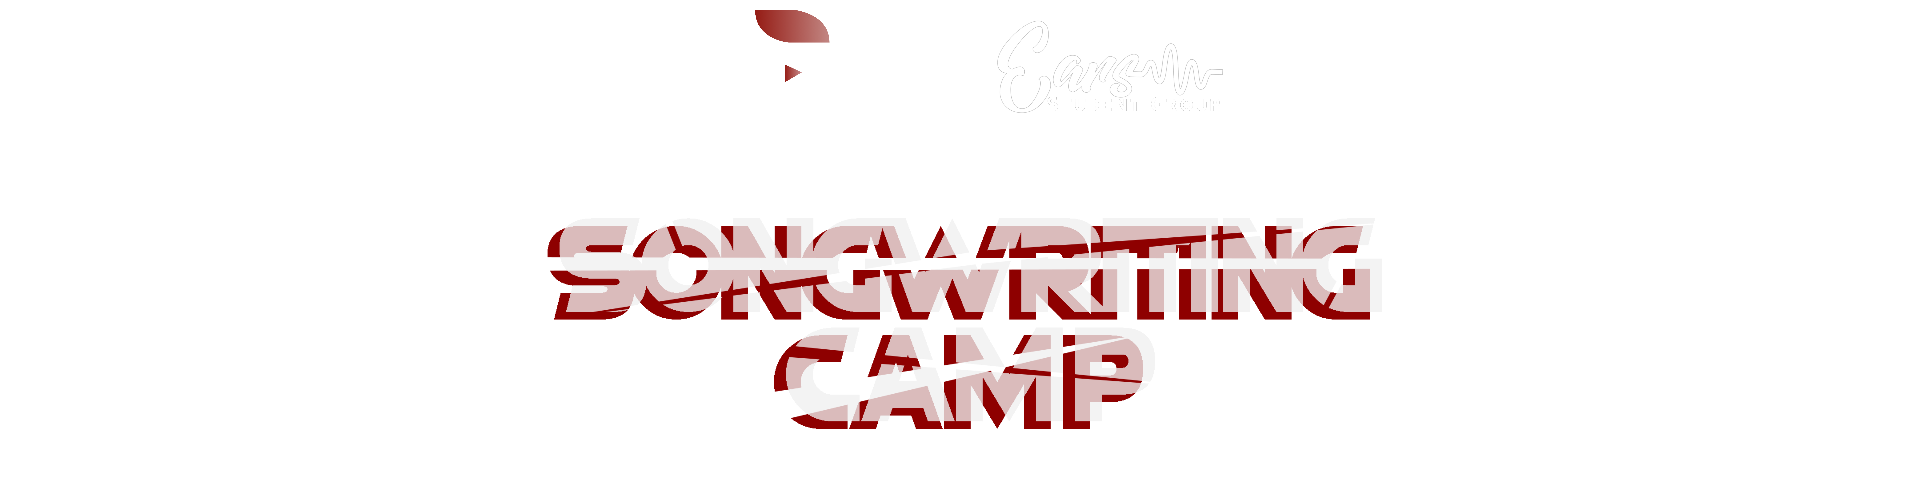 Songwriting Camp Banner - Dates